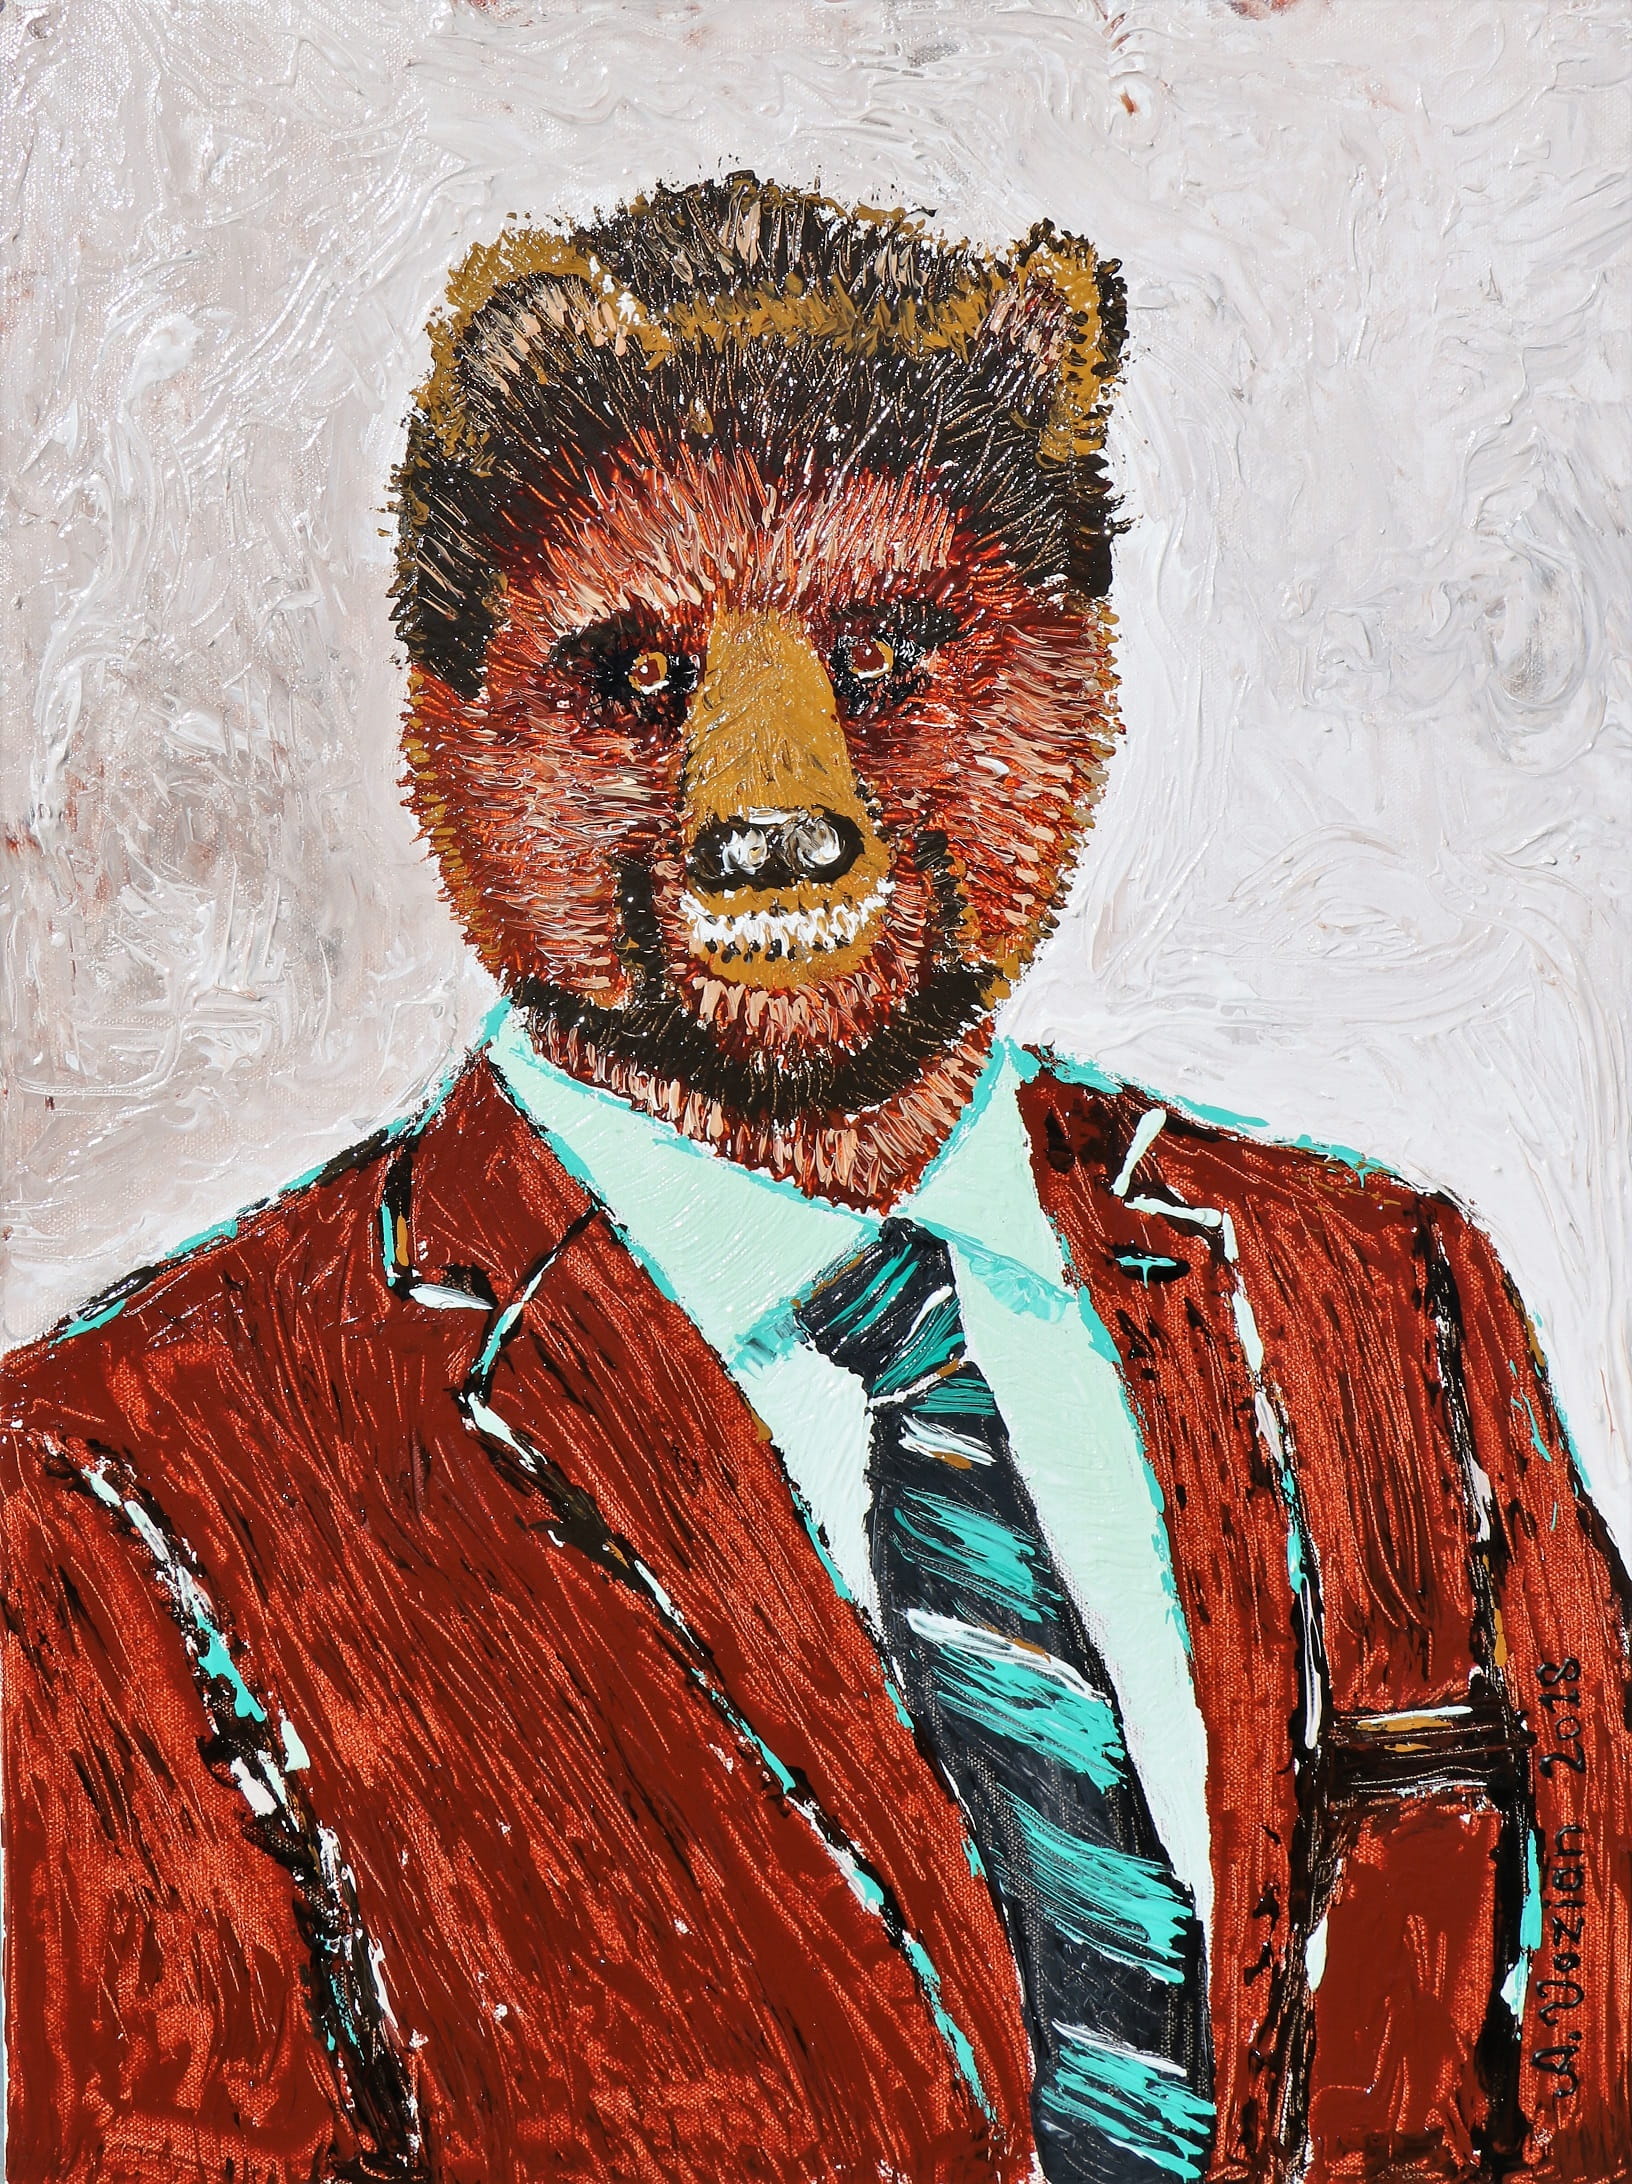 “Bear a resemblance”, by Alex Vozian in 2018.